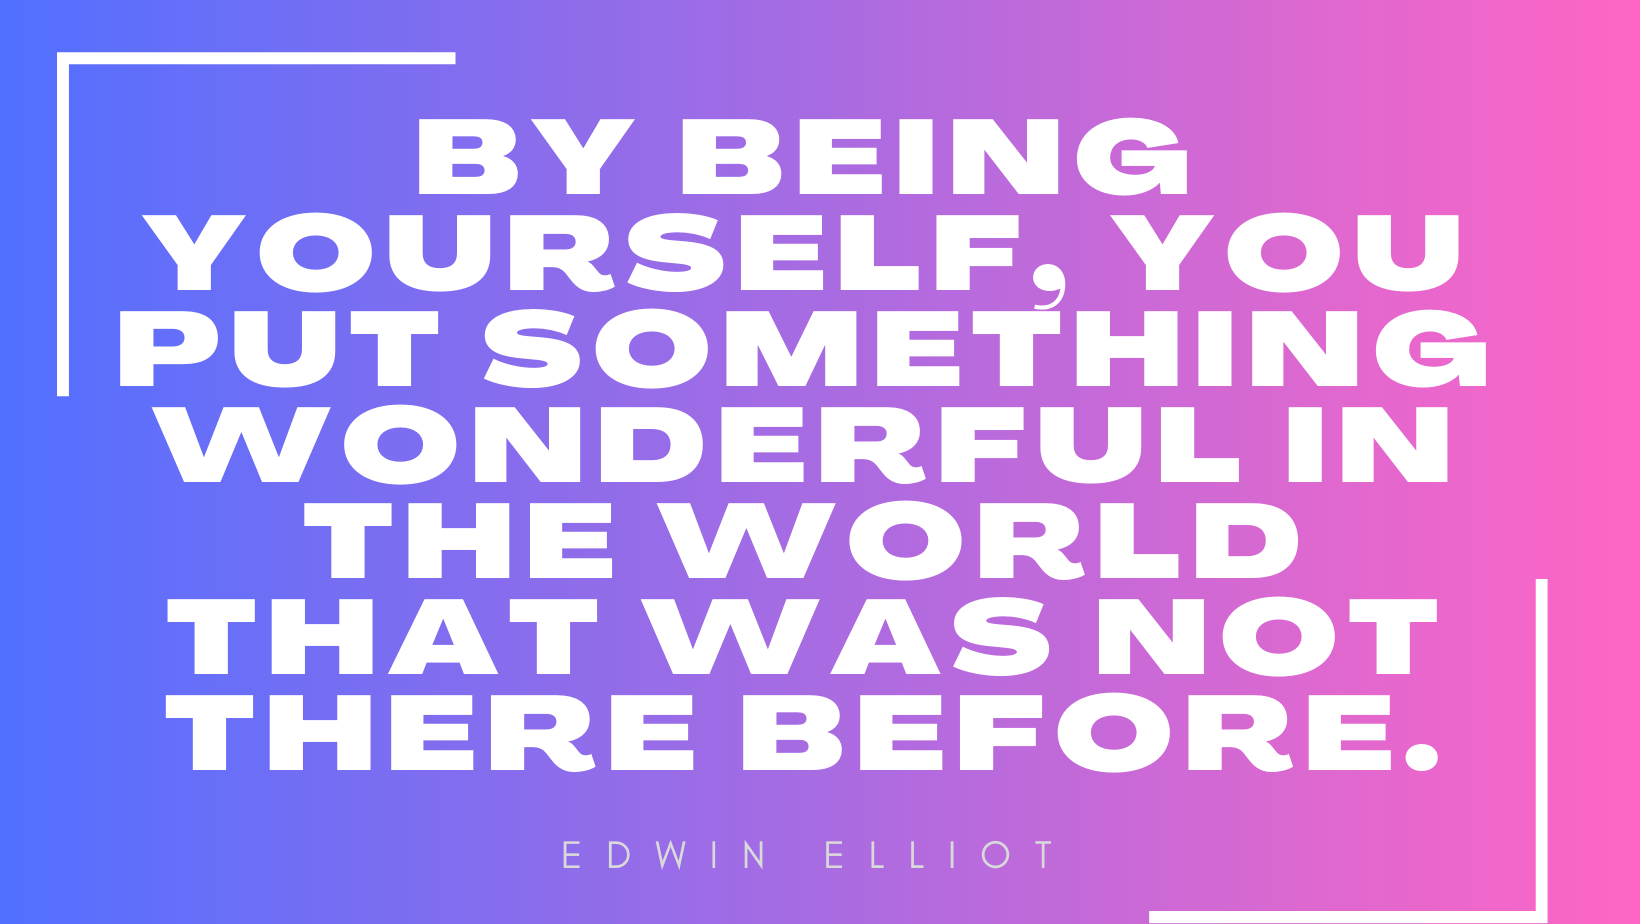 'By being yourself, you put something wonderful in the world that was not there before.'